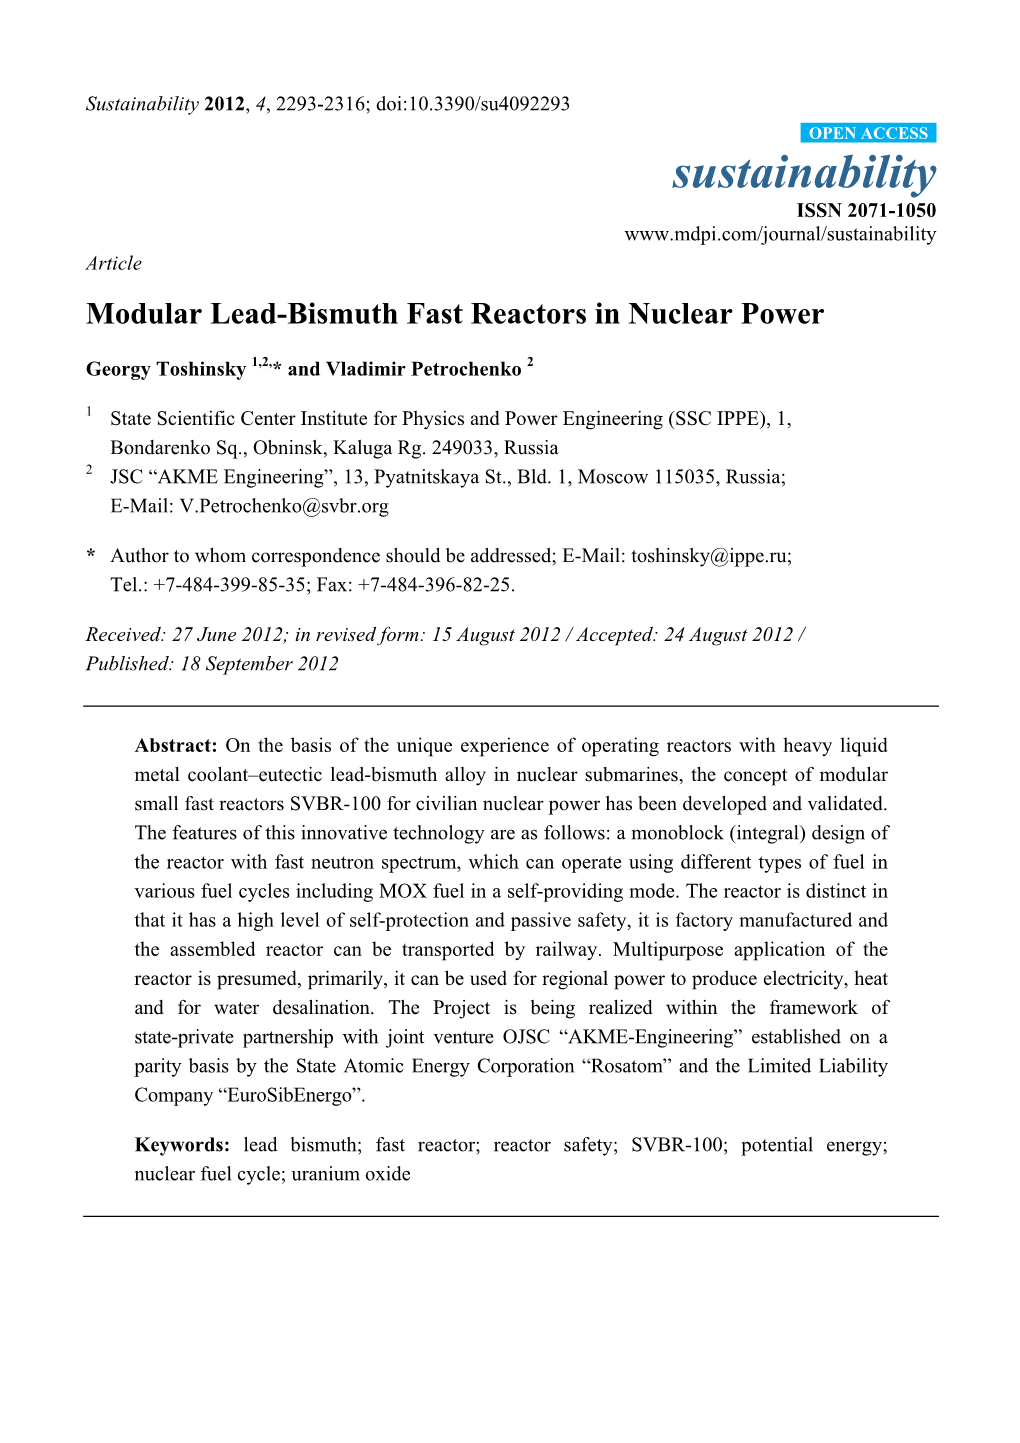 Modular Lead-Bismuth Fast Reactors in Nuclear Power